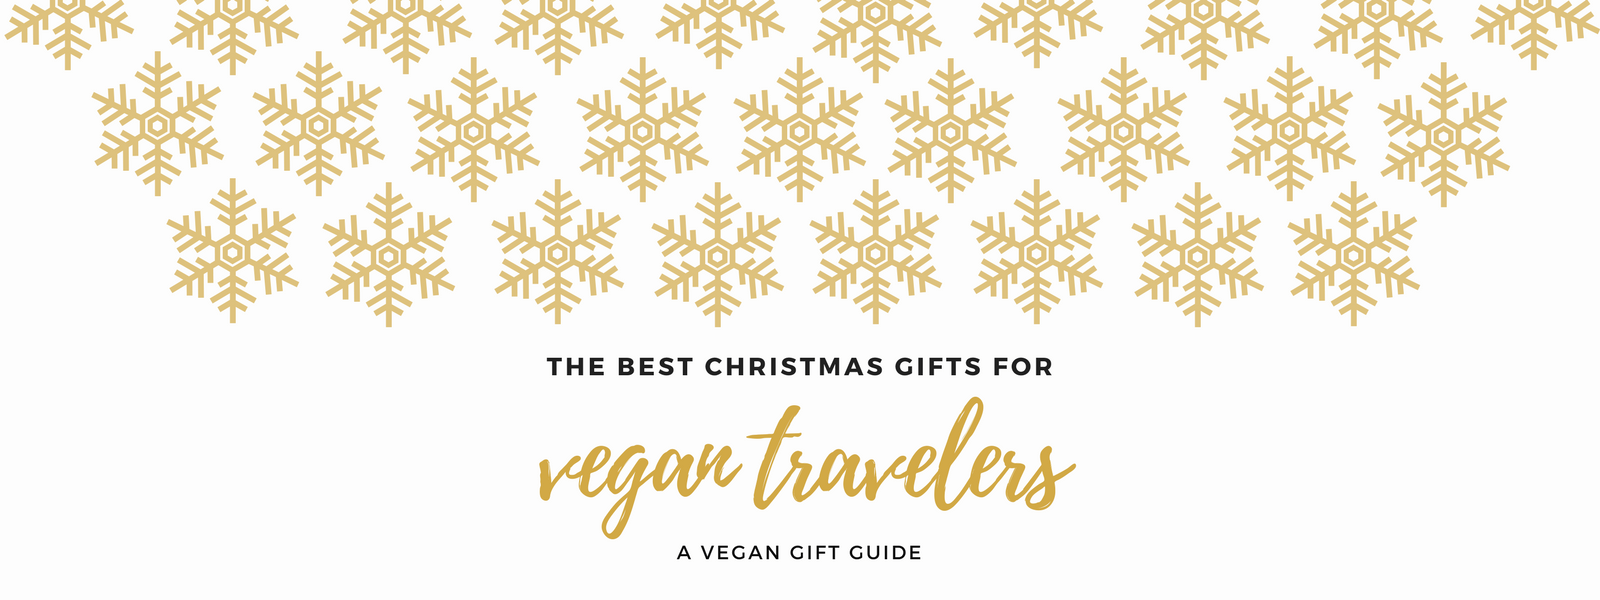 The Best Christmas Gifts for Vegan Travelers | Corkor